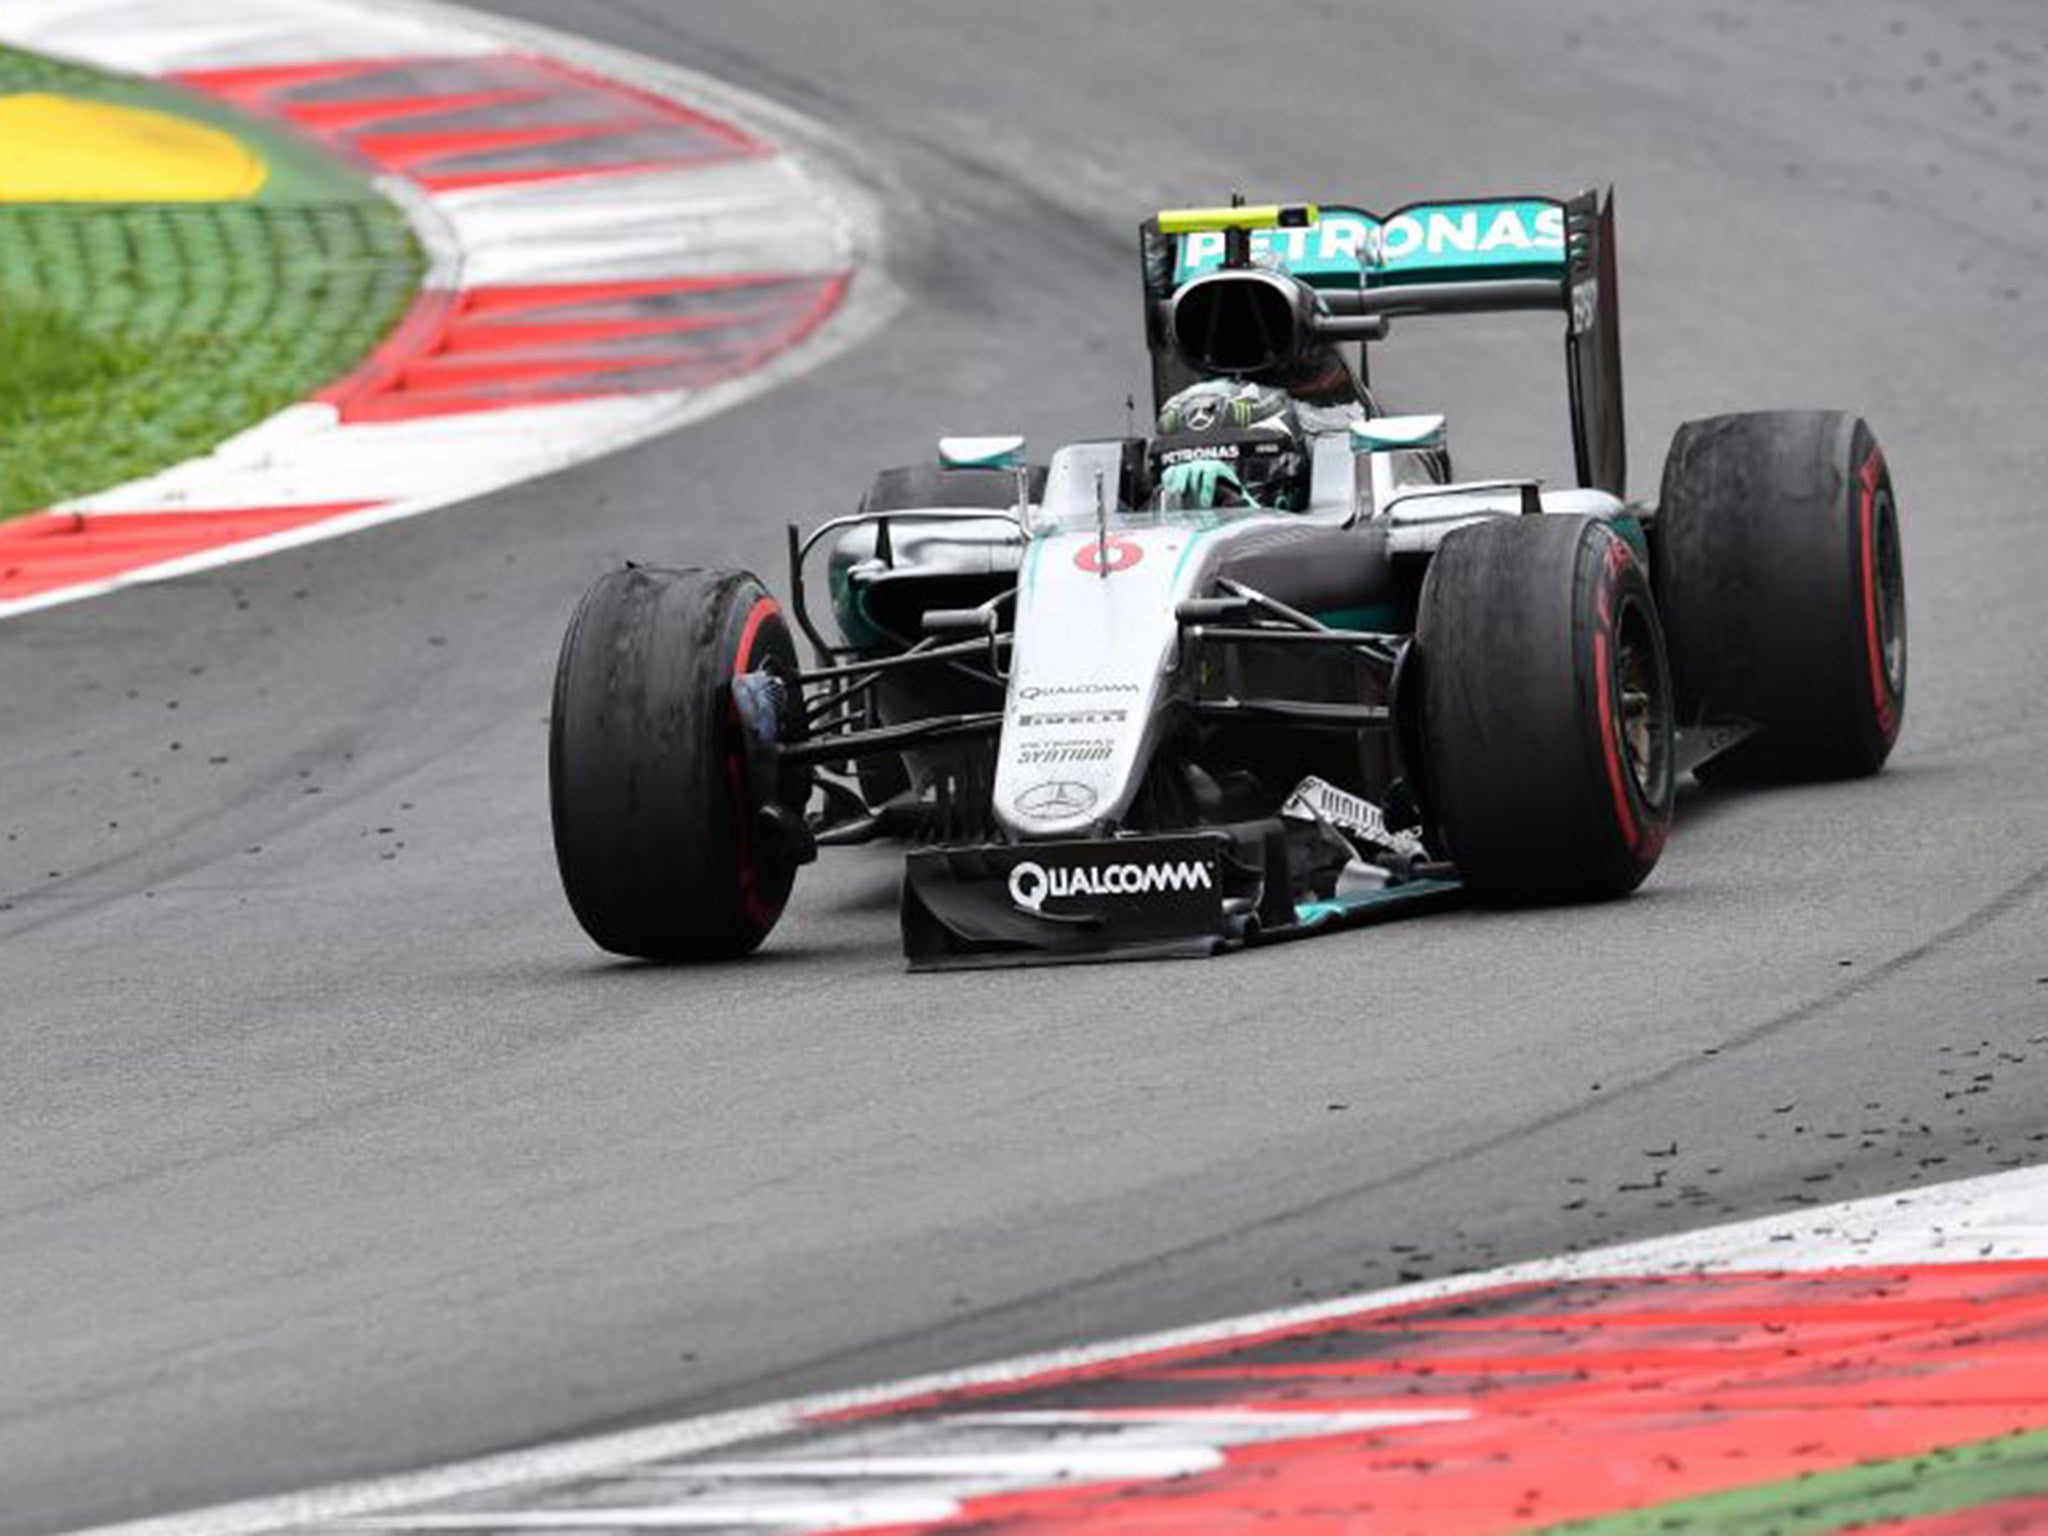 Nico Rosberg limps round on the final lap of the Austrian Grand Prix after crashing with Lewis Hamilton